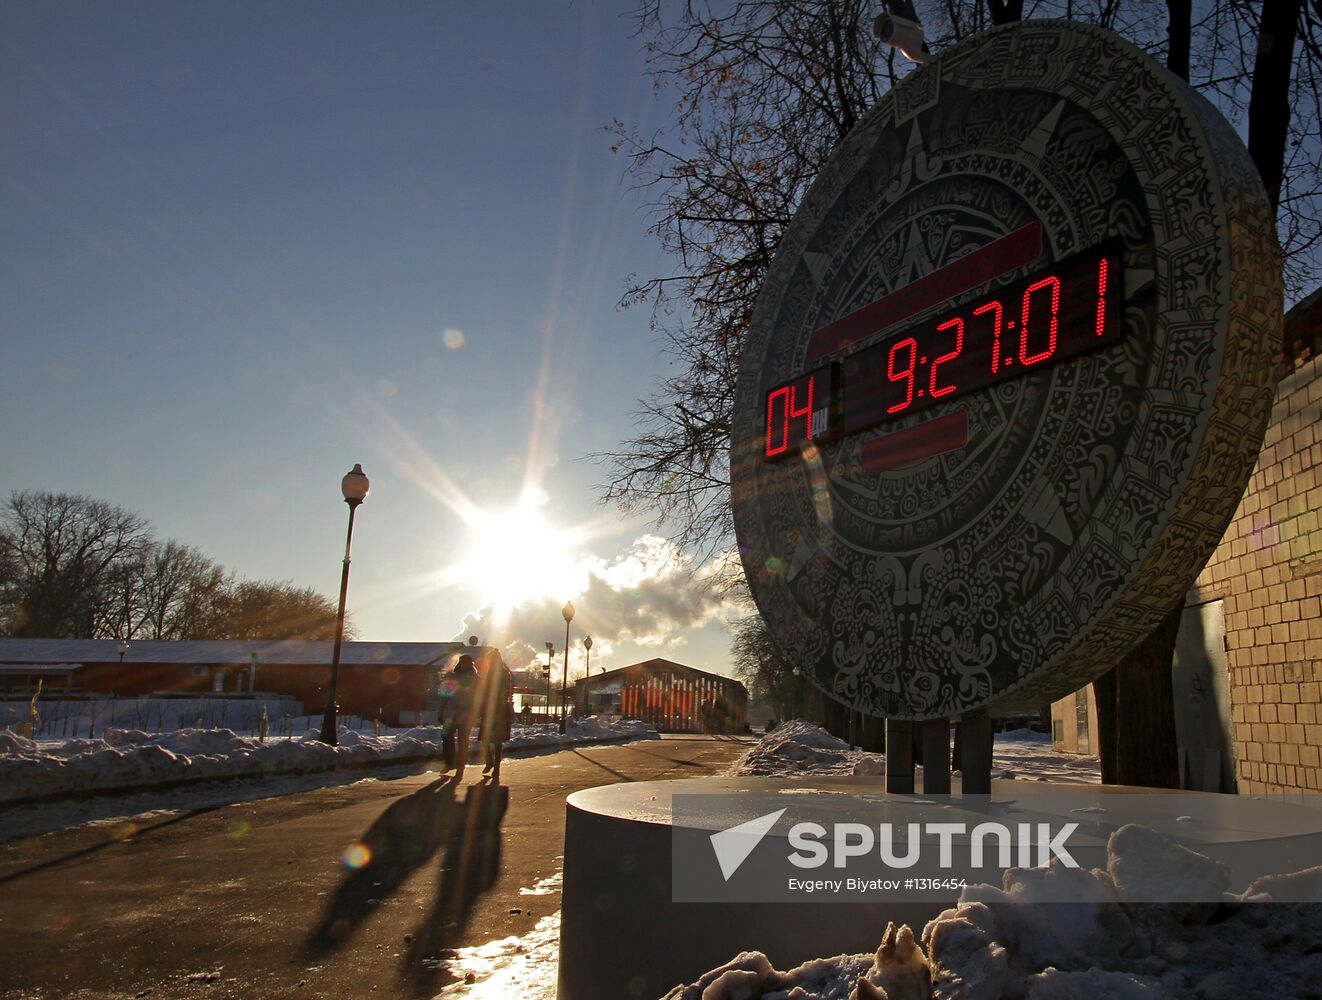 Countdown clock to doomsday in Gorky Park